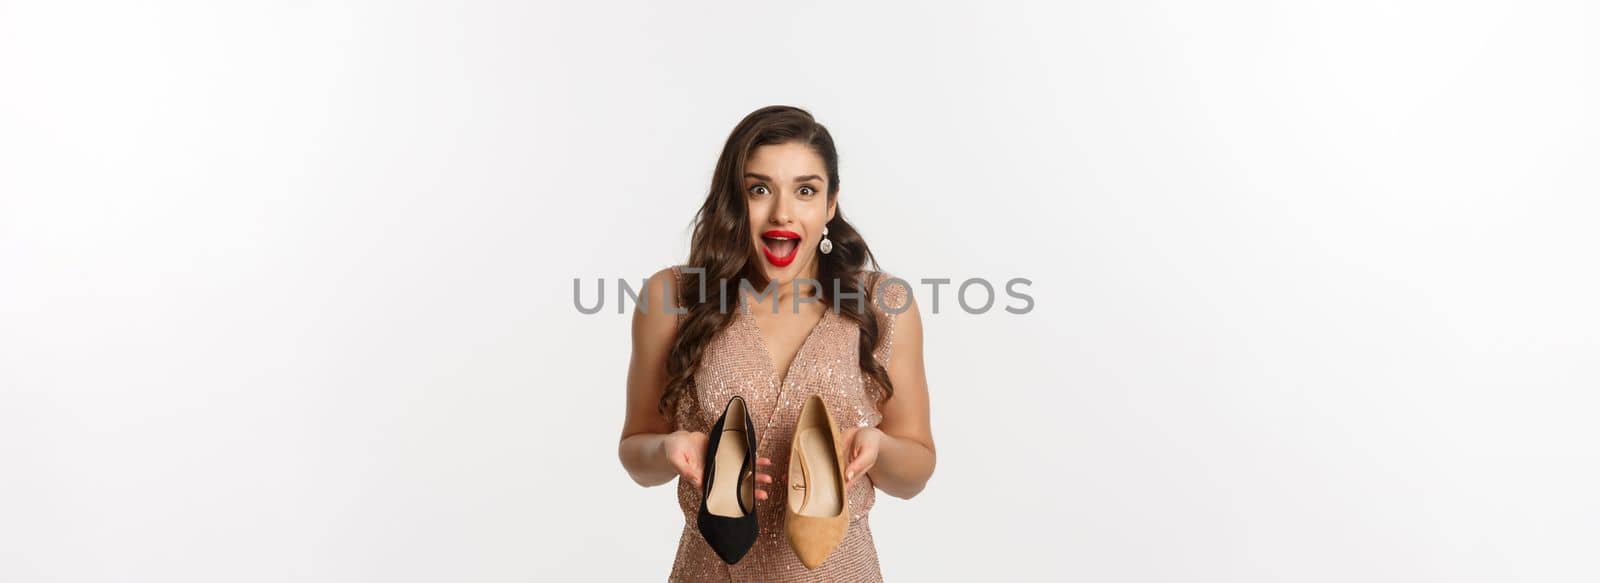 Party and celebration concept. Excited woman holding two types of heels and looking amazed, picking outfit for Christmas, standing in elegant dress over white background.